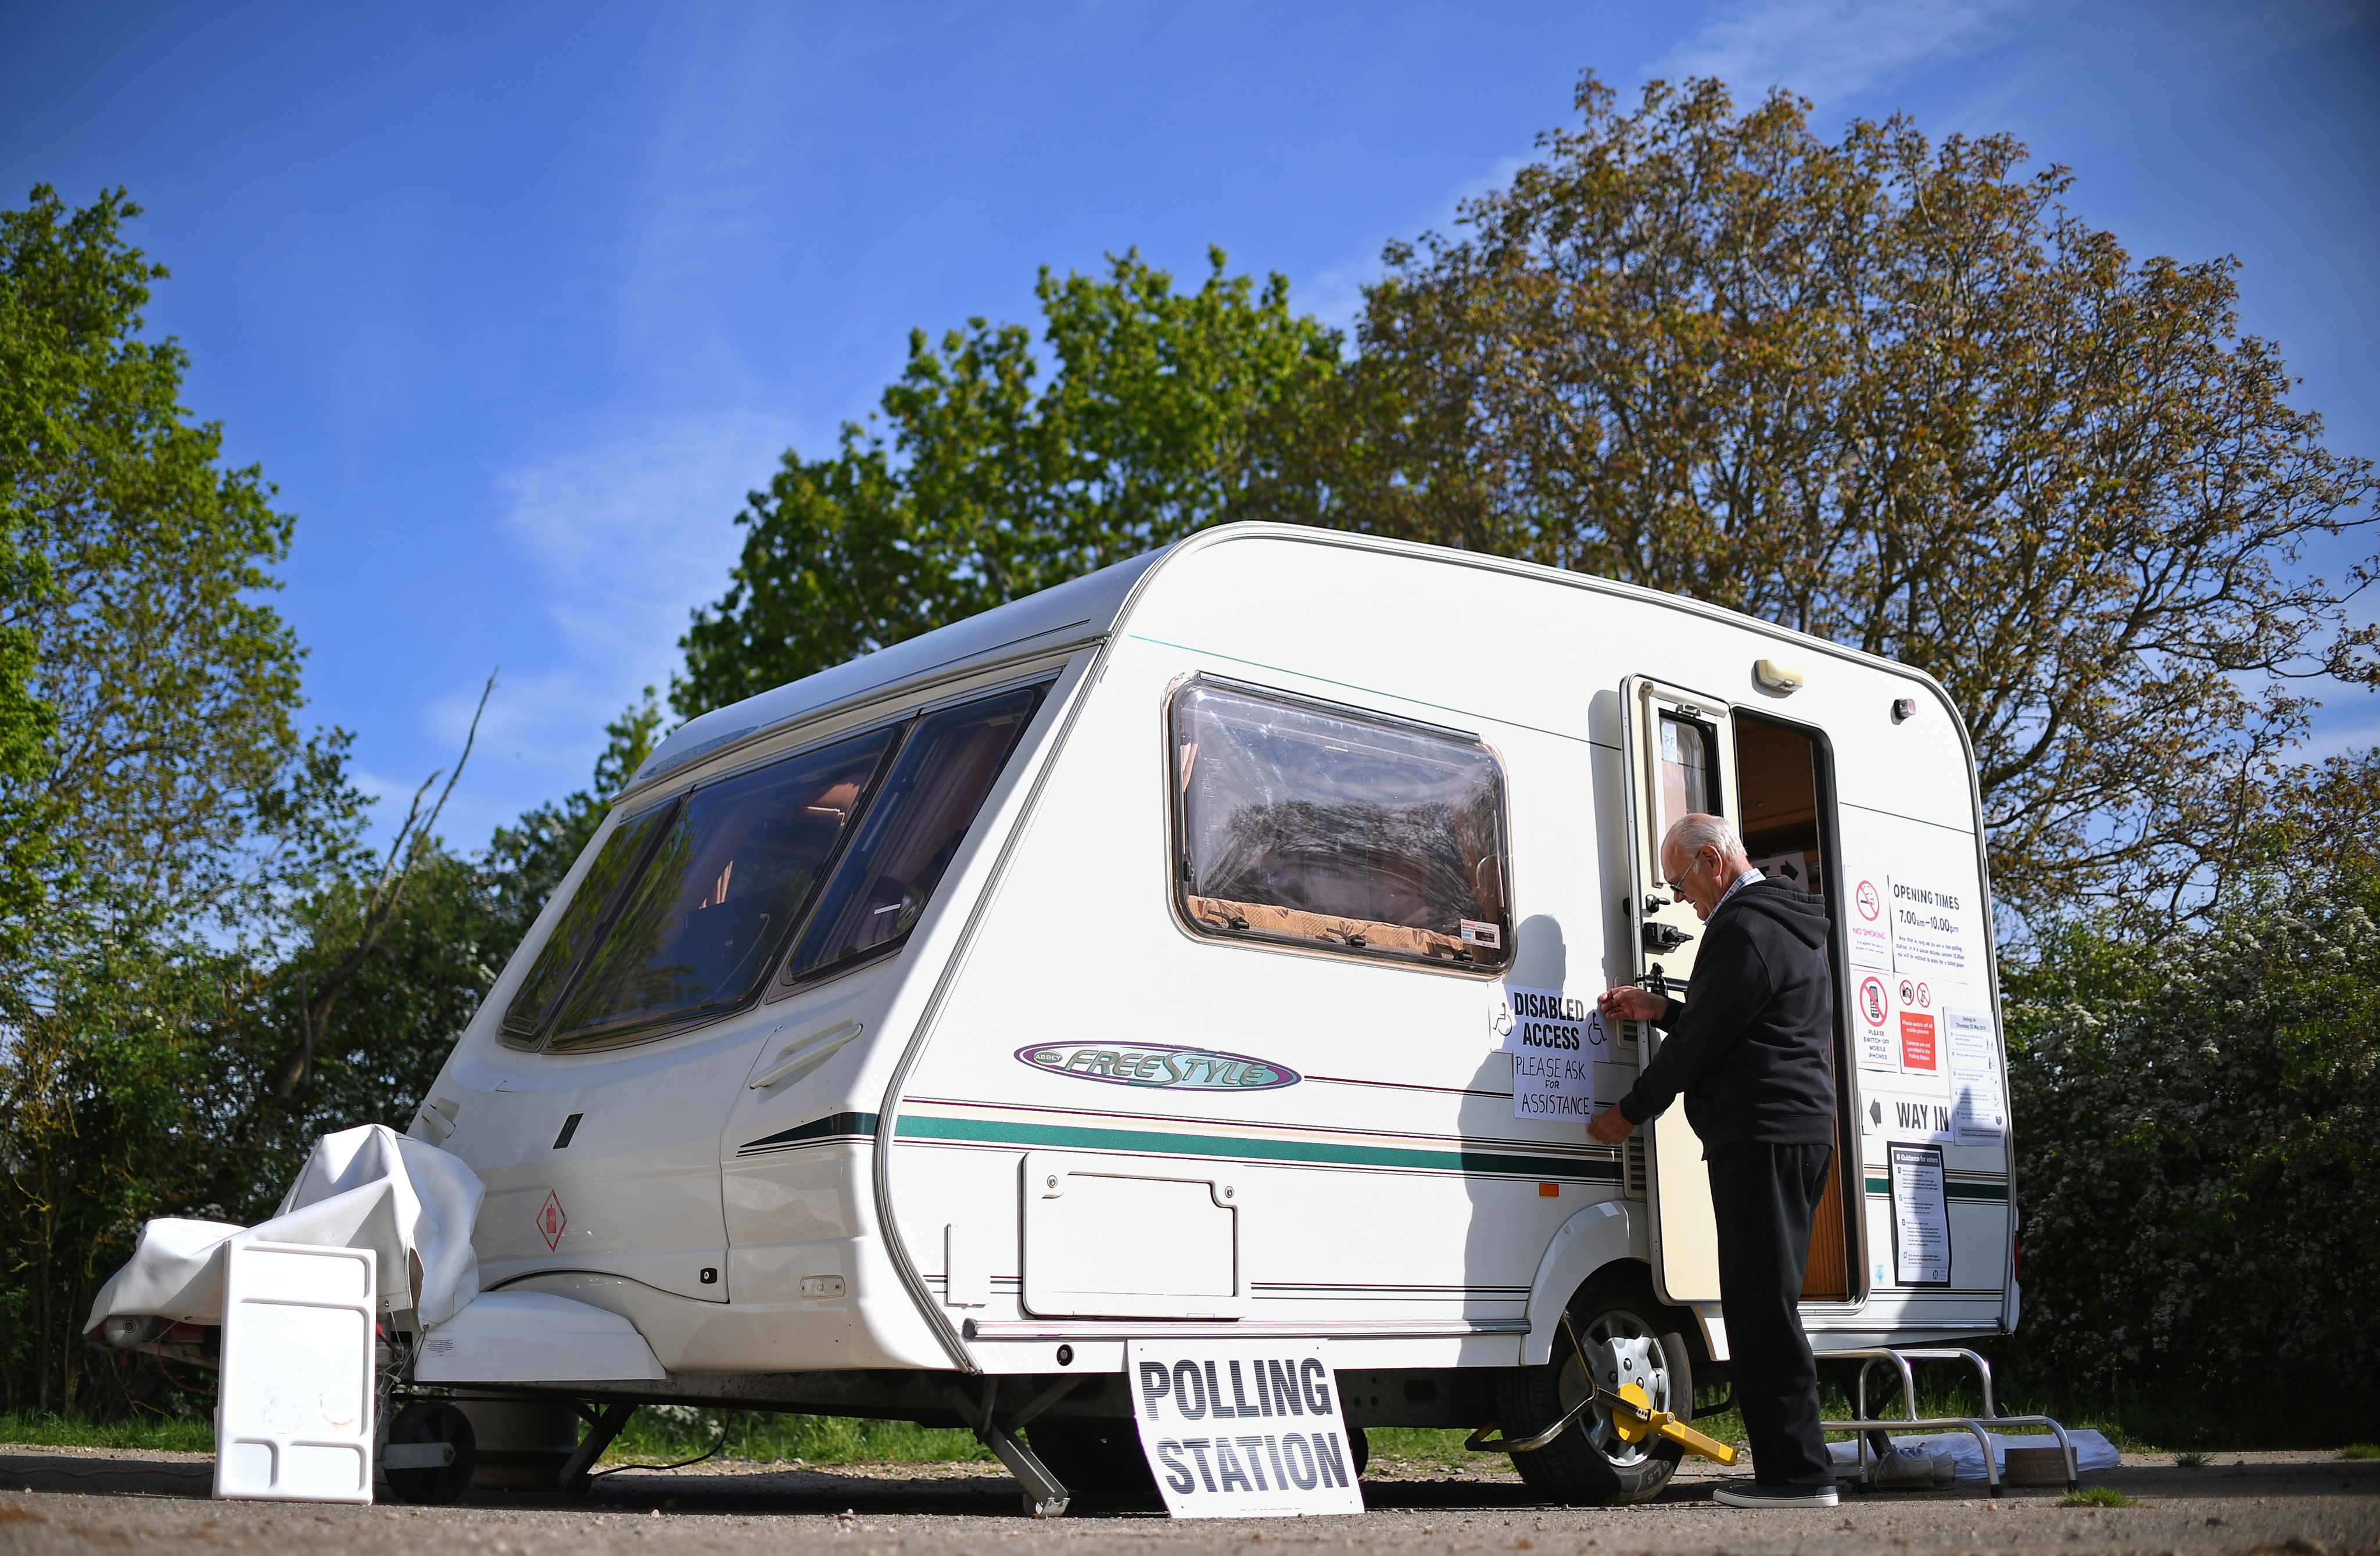 Caravan being used as a polling station for the European elections